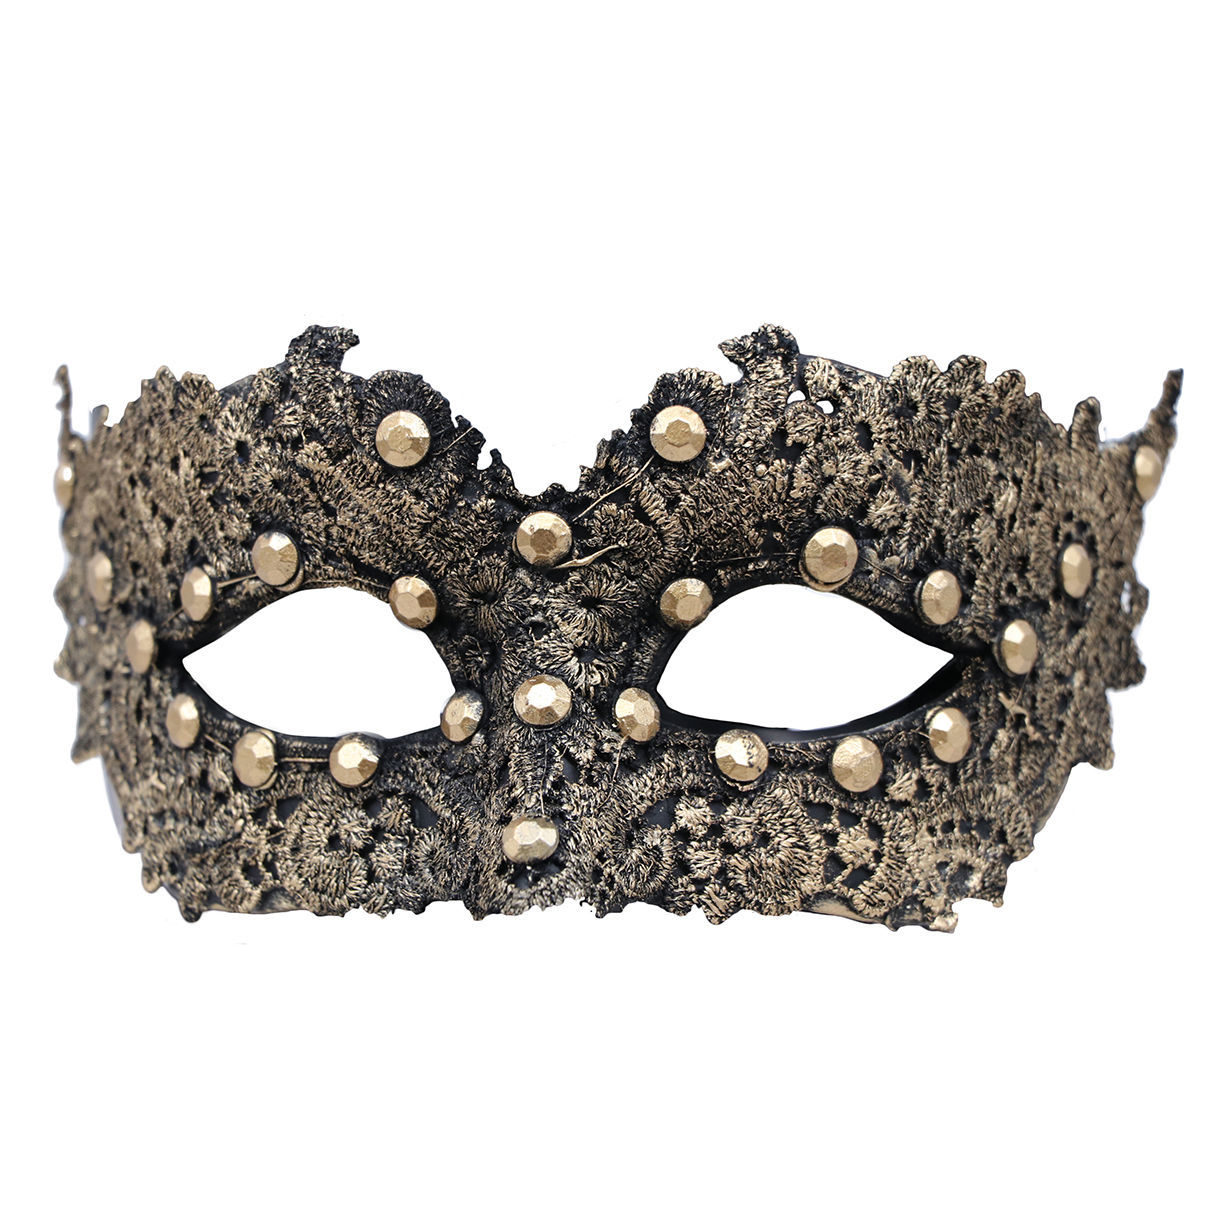 Venetian Golden Lace Mask is contoured faux leather covered with gold lace and plastic gold jewels, elastic band to secure